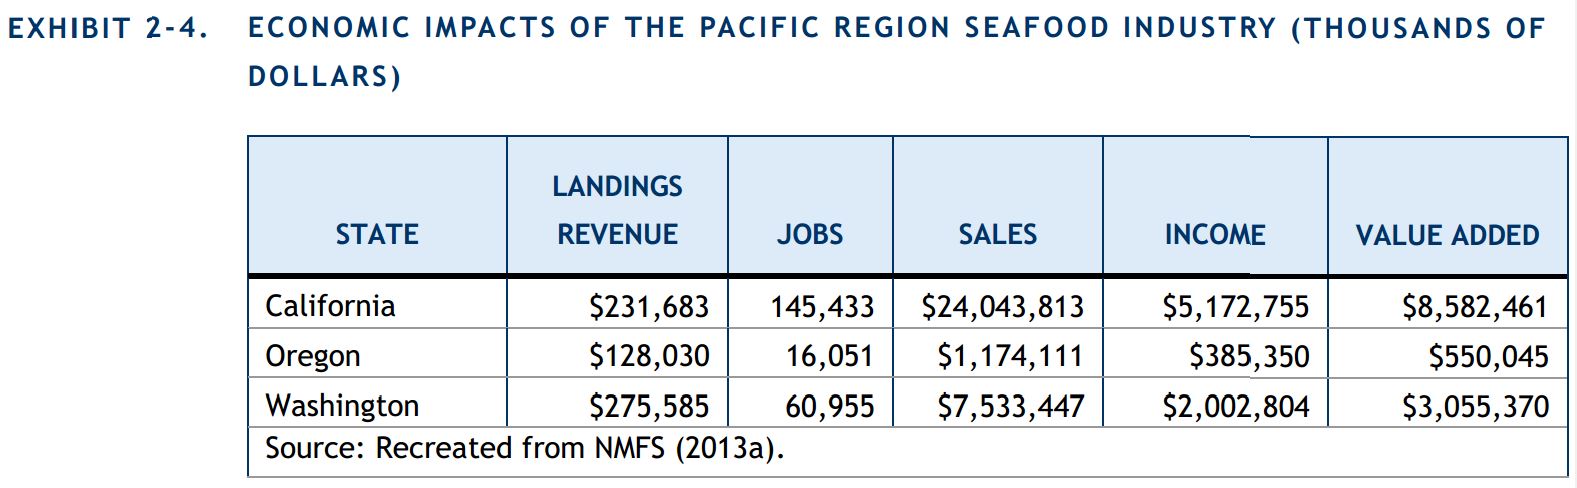 Economic Impacts of the Pacific Region Seafood Industry